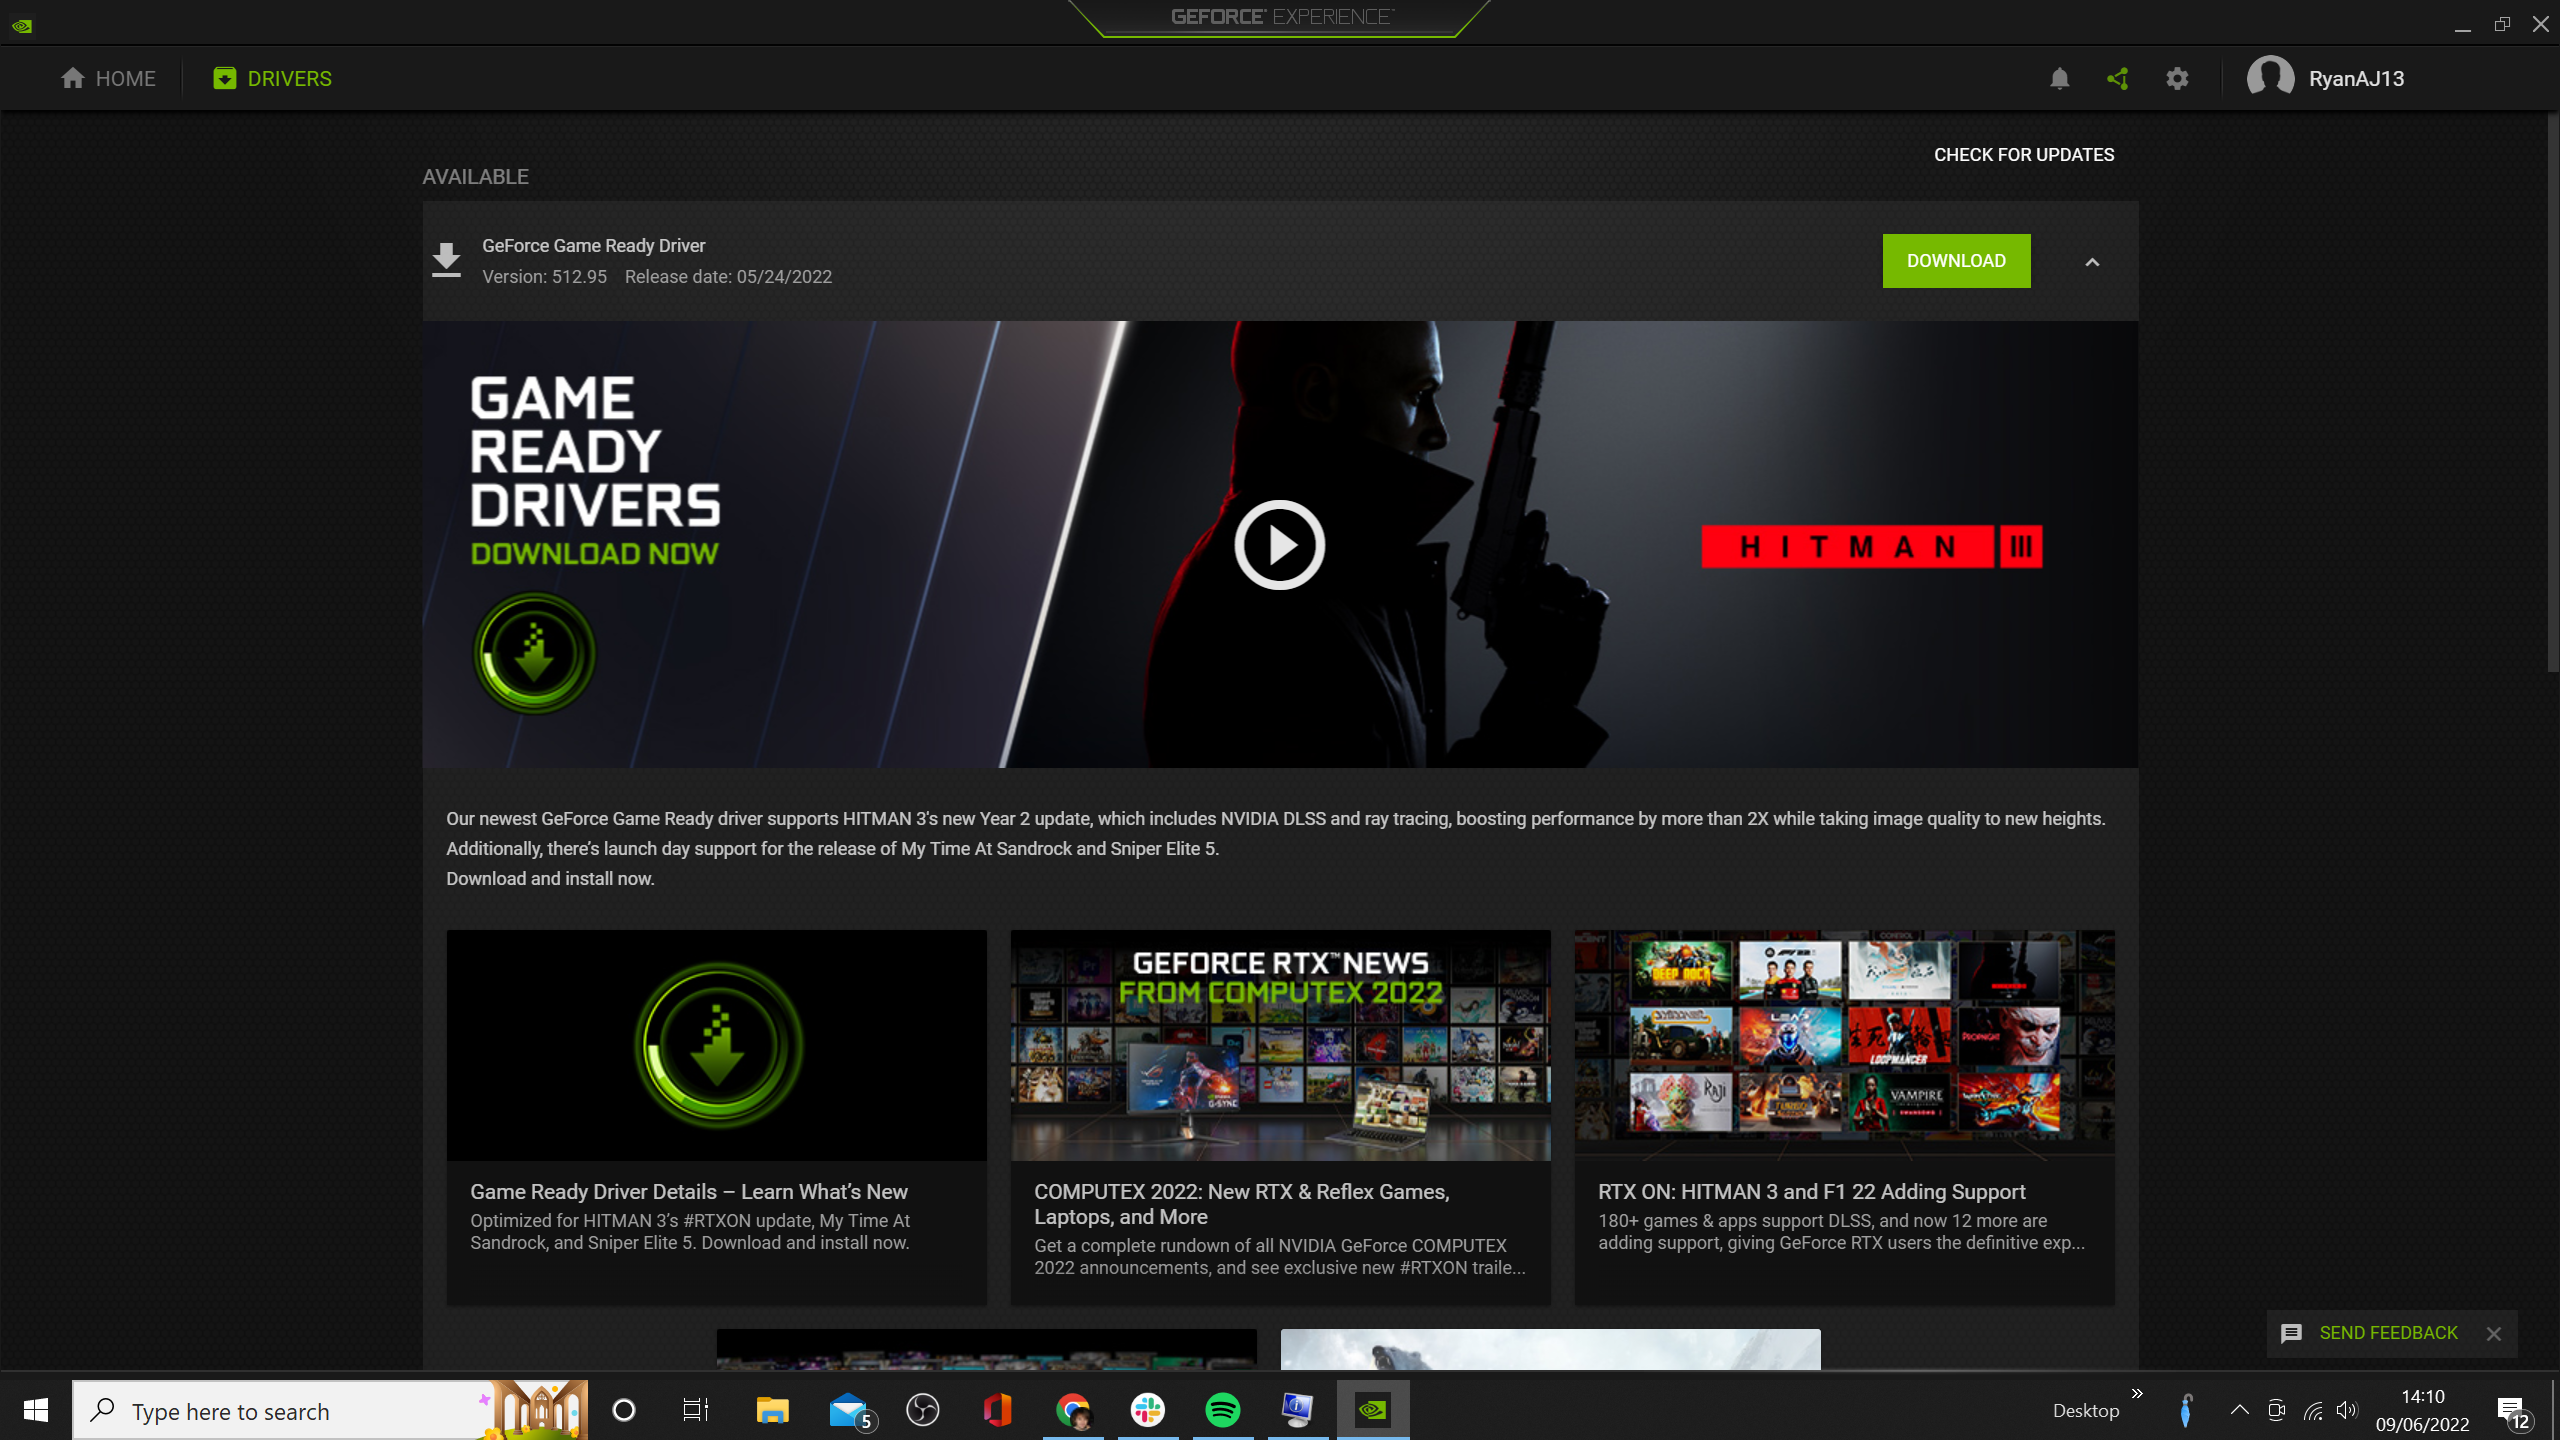 Visit the graphics card manufacturer's website.
Download and install the latest drivers for the graphics card.